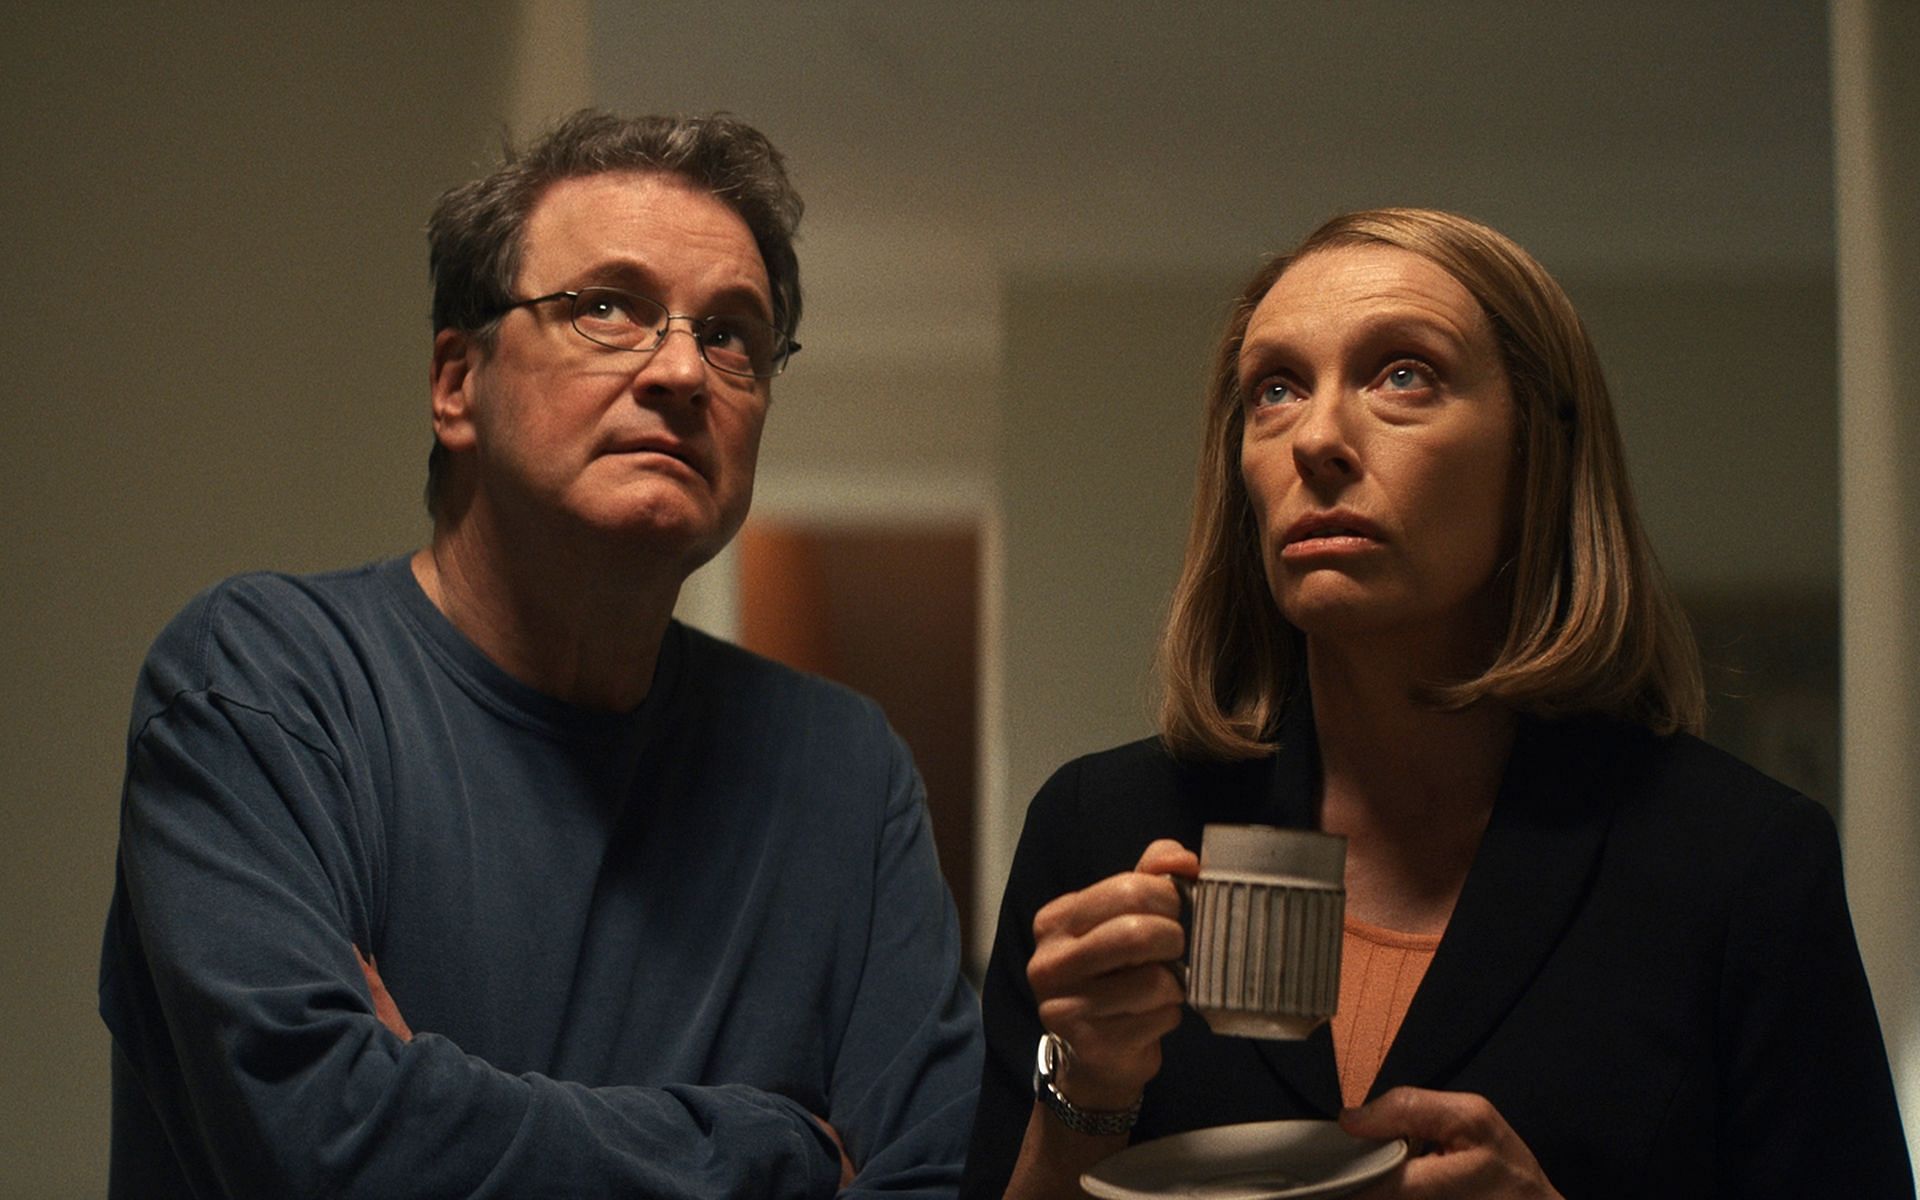 Episode 4 of The Staircase premieres on HBO Max on Thursday, May 12, 2022, at 3 AM ET. (Image via IMDb)